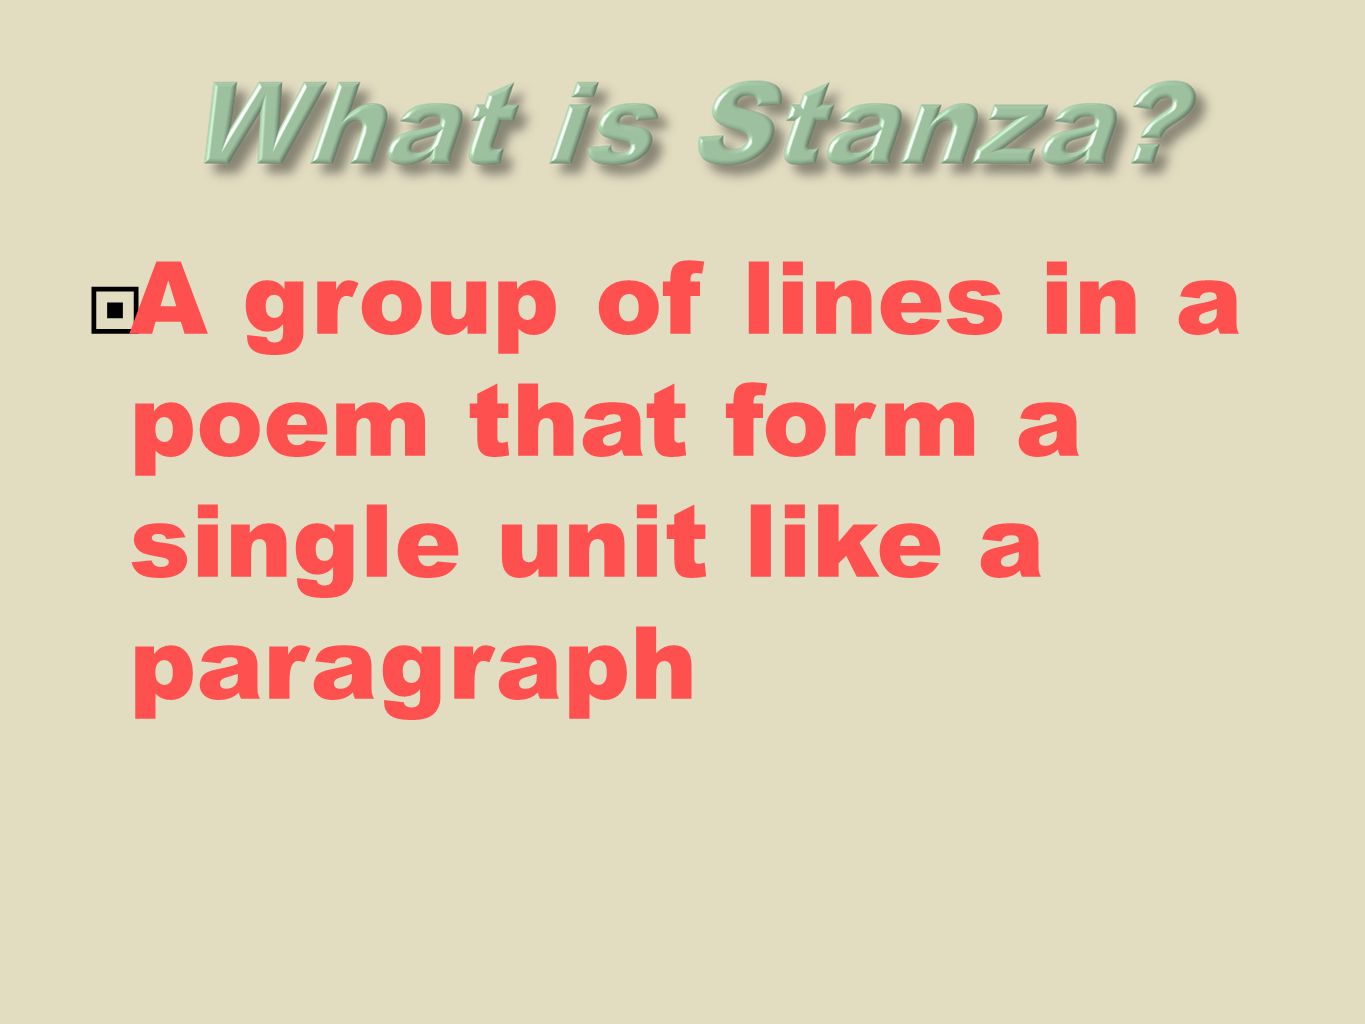  A group of lines in a poem that form a single unit like a paragraph